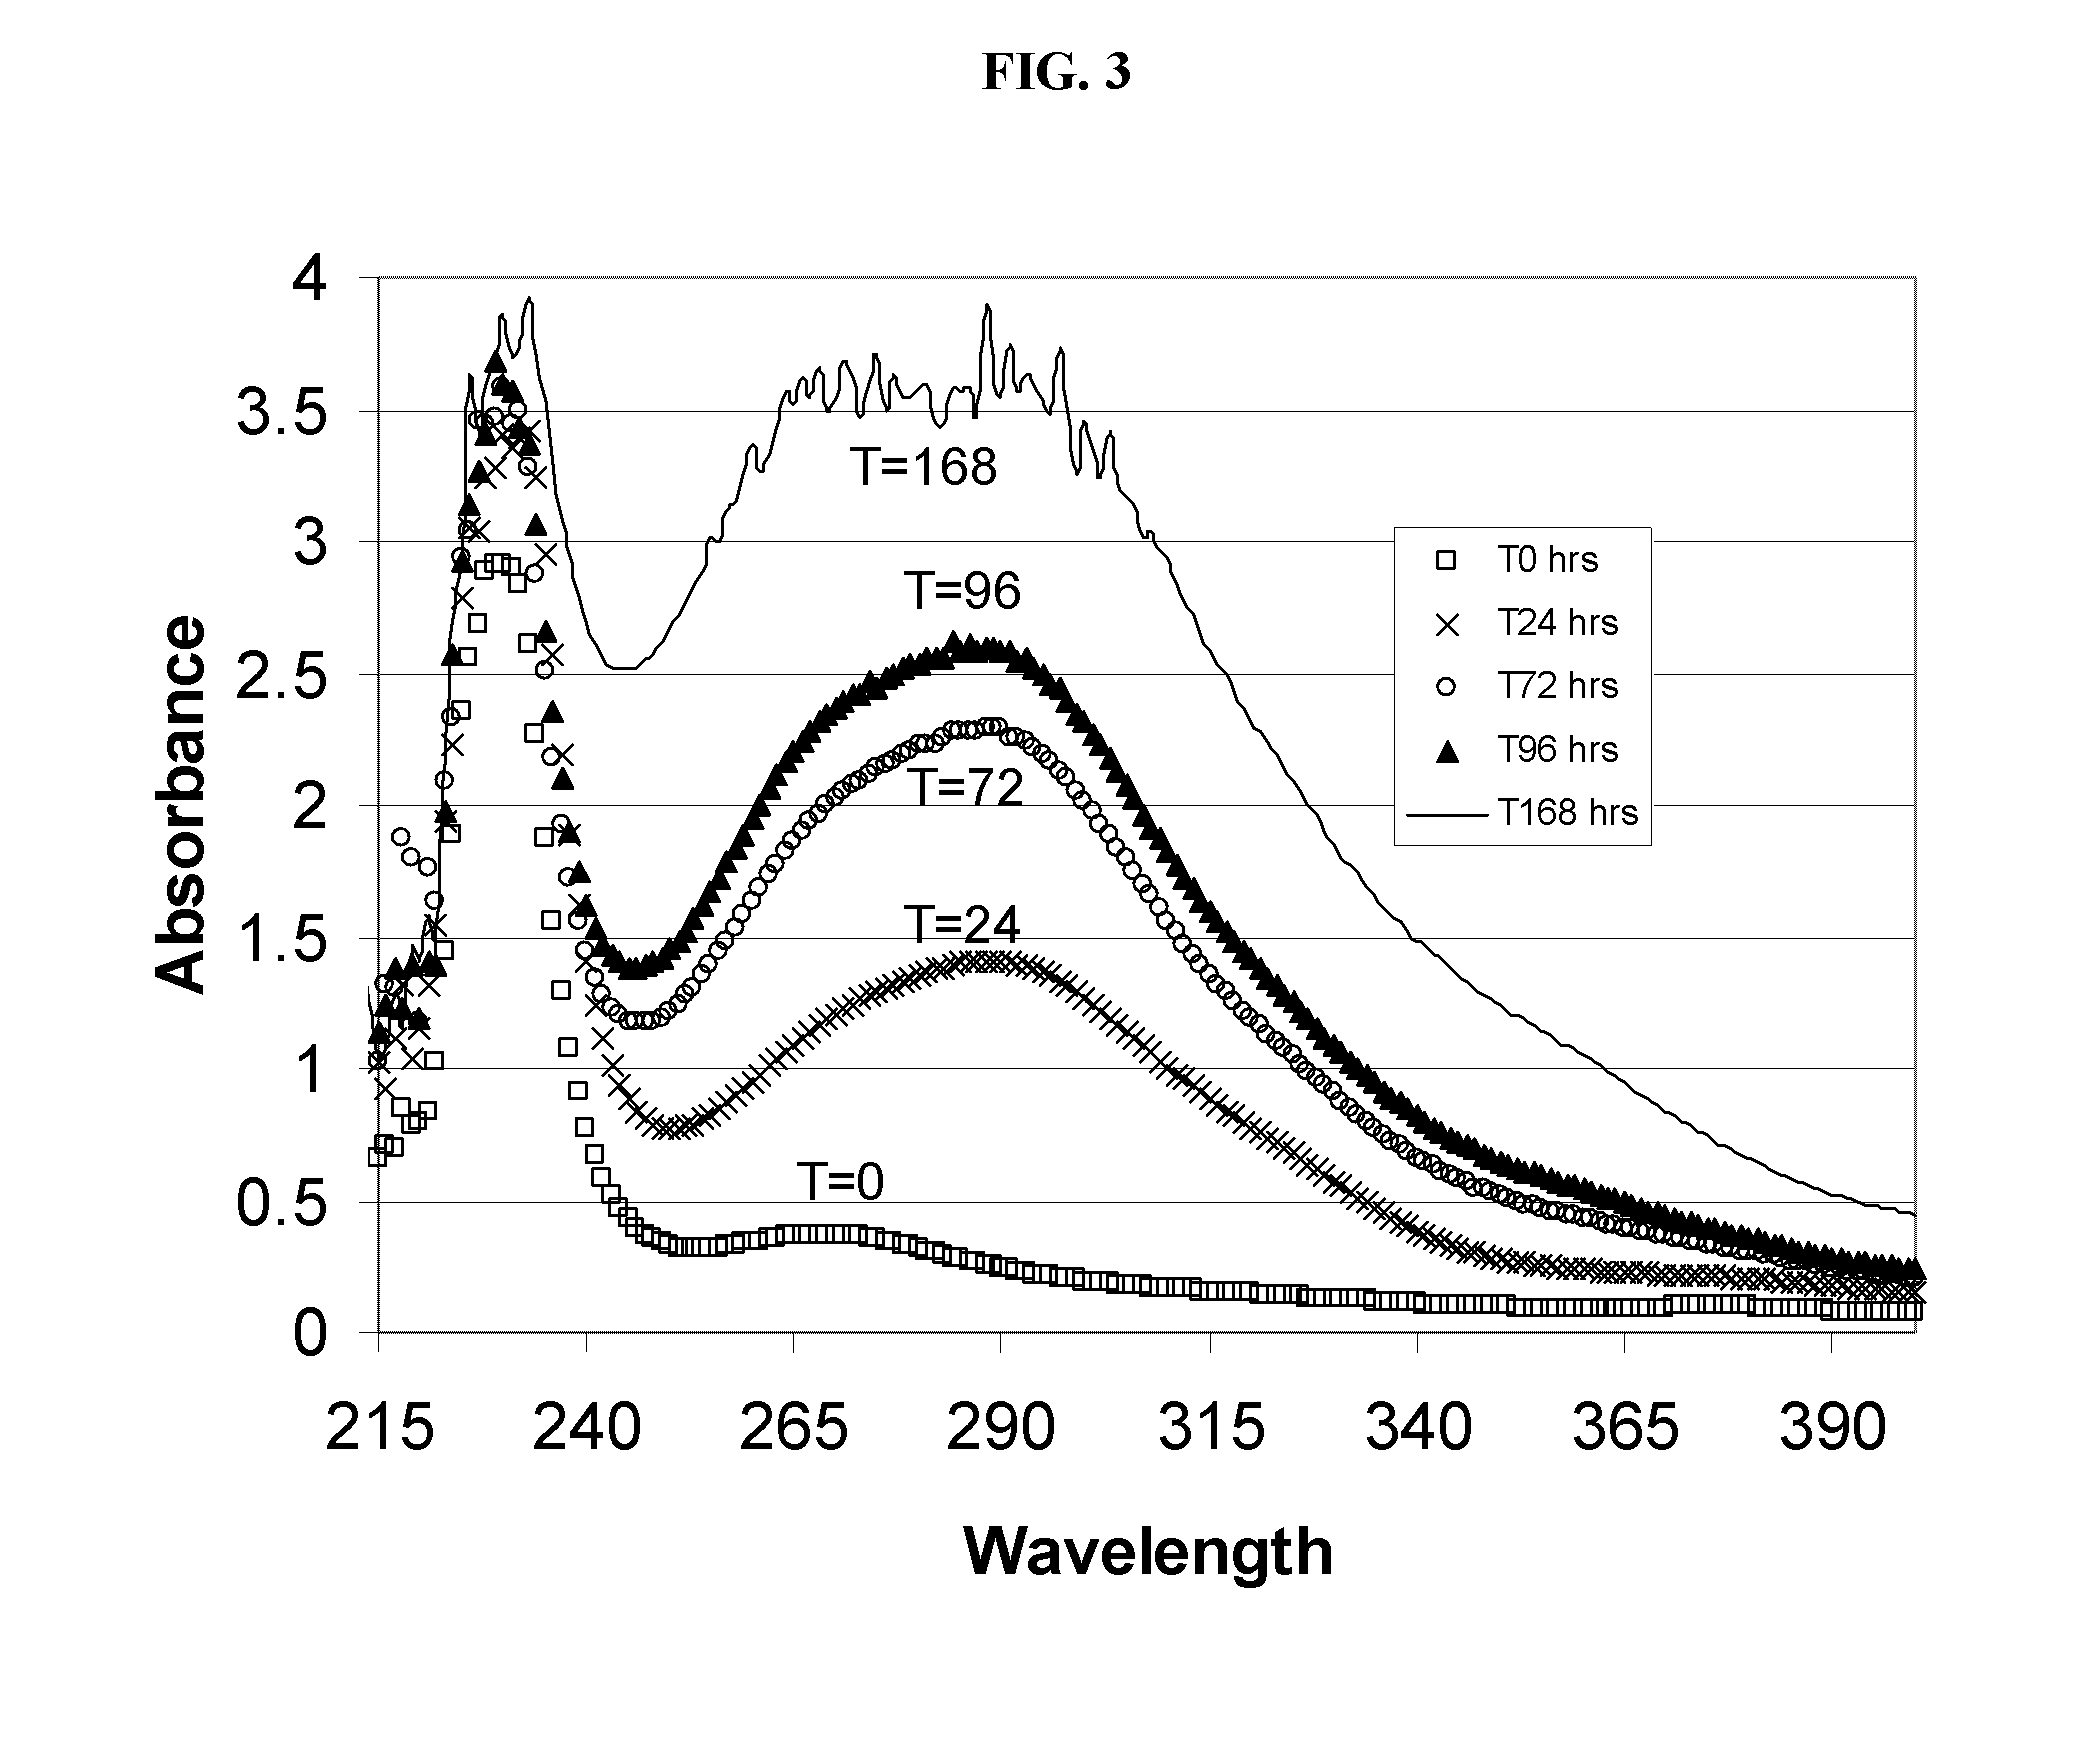 Alkylated cyclodextrin compositions and processes for preparing and using the same